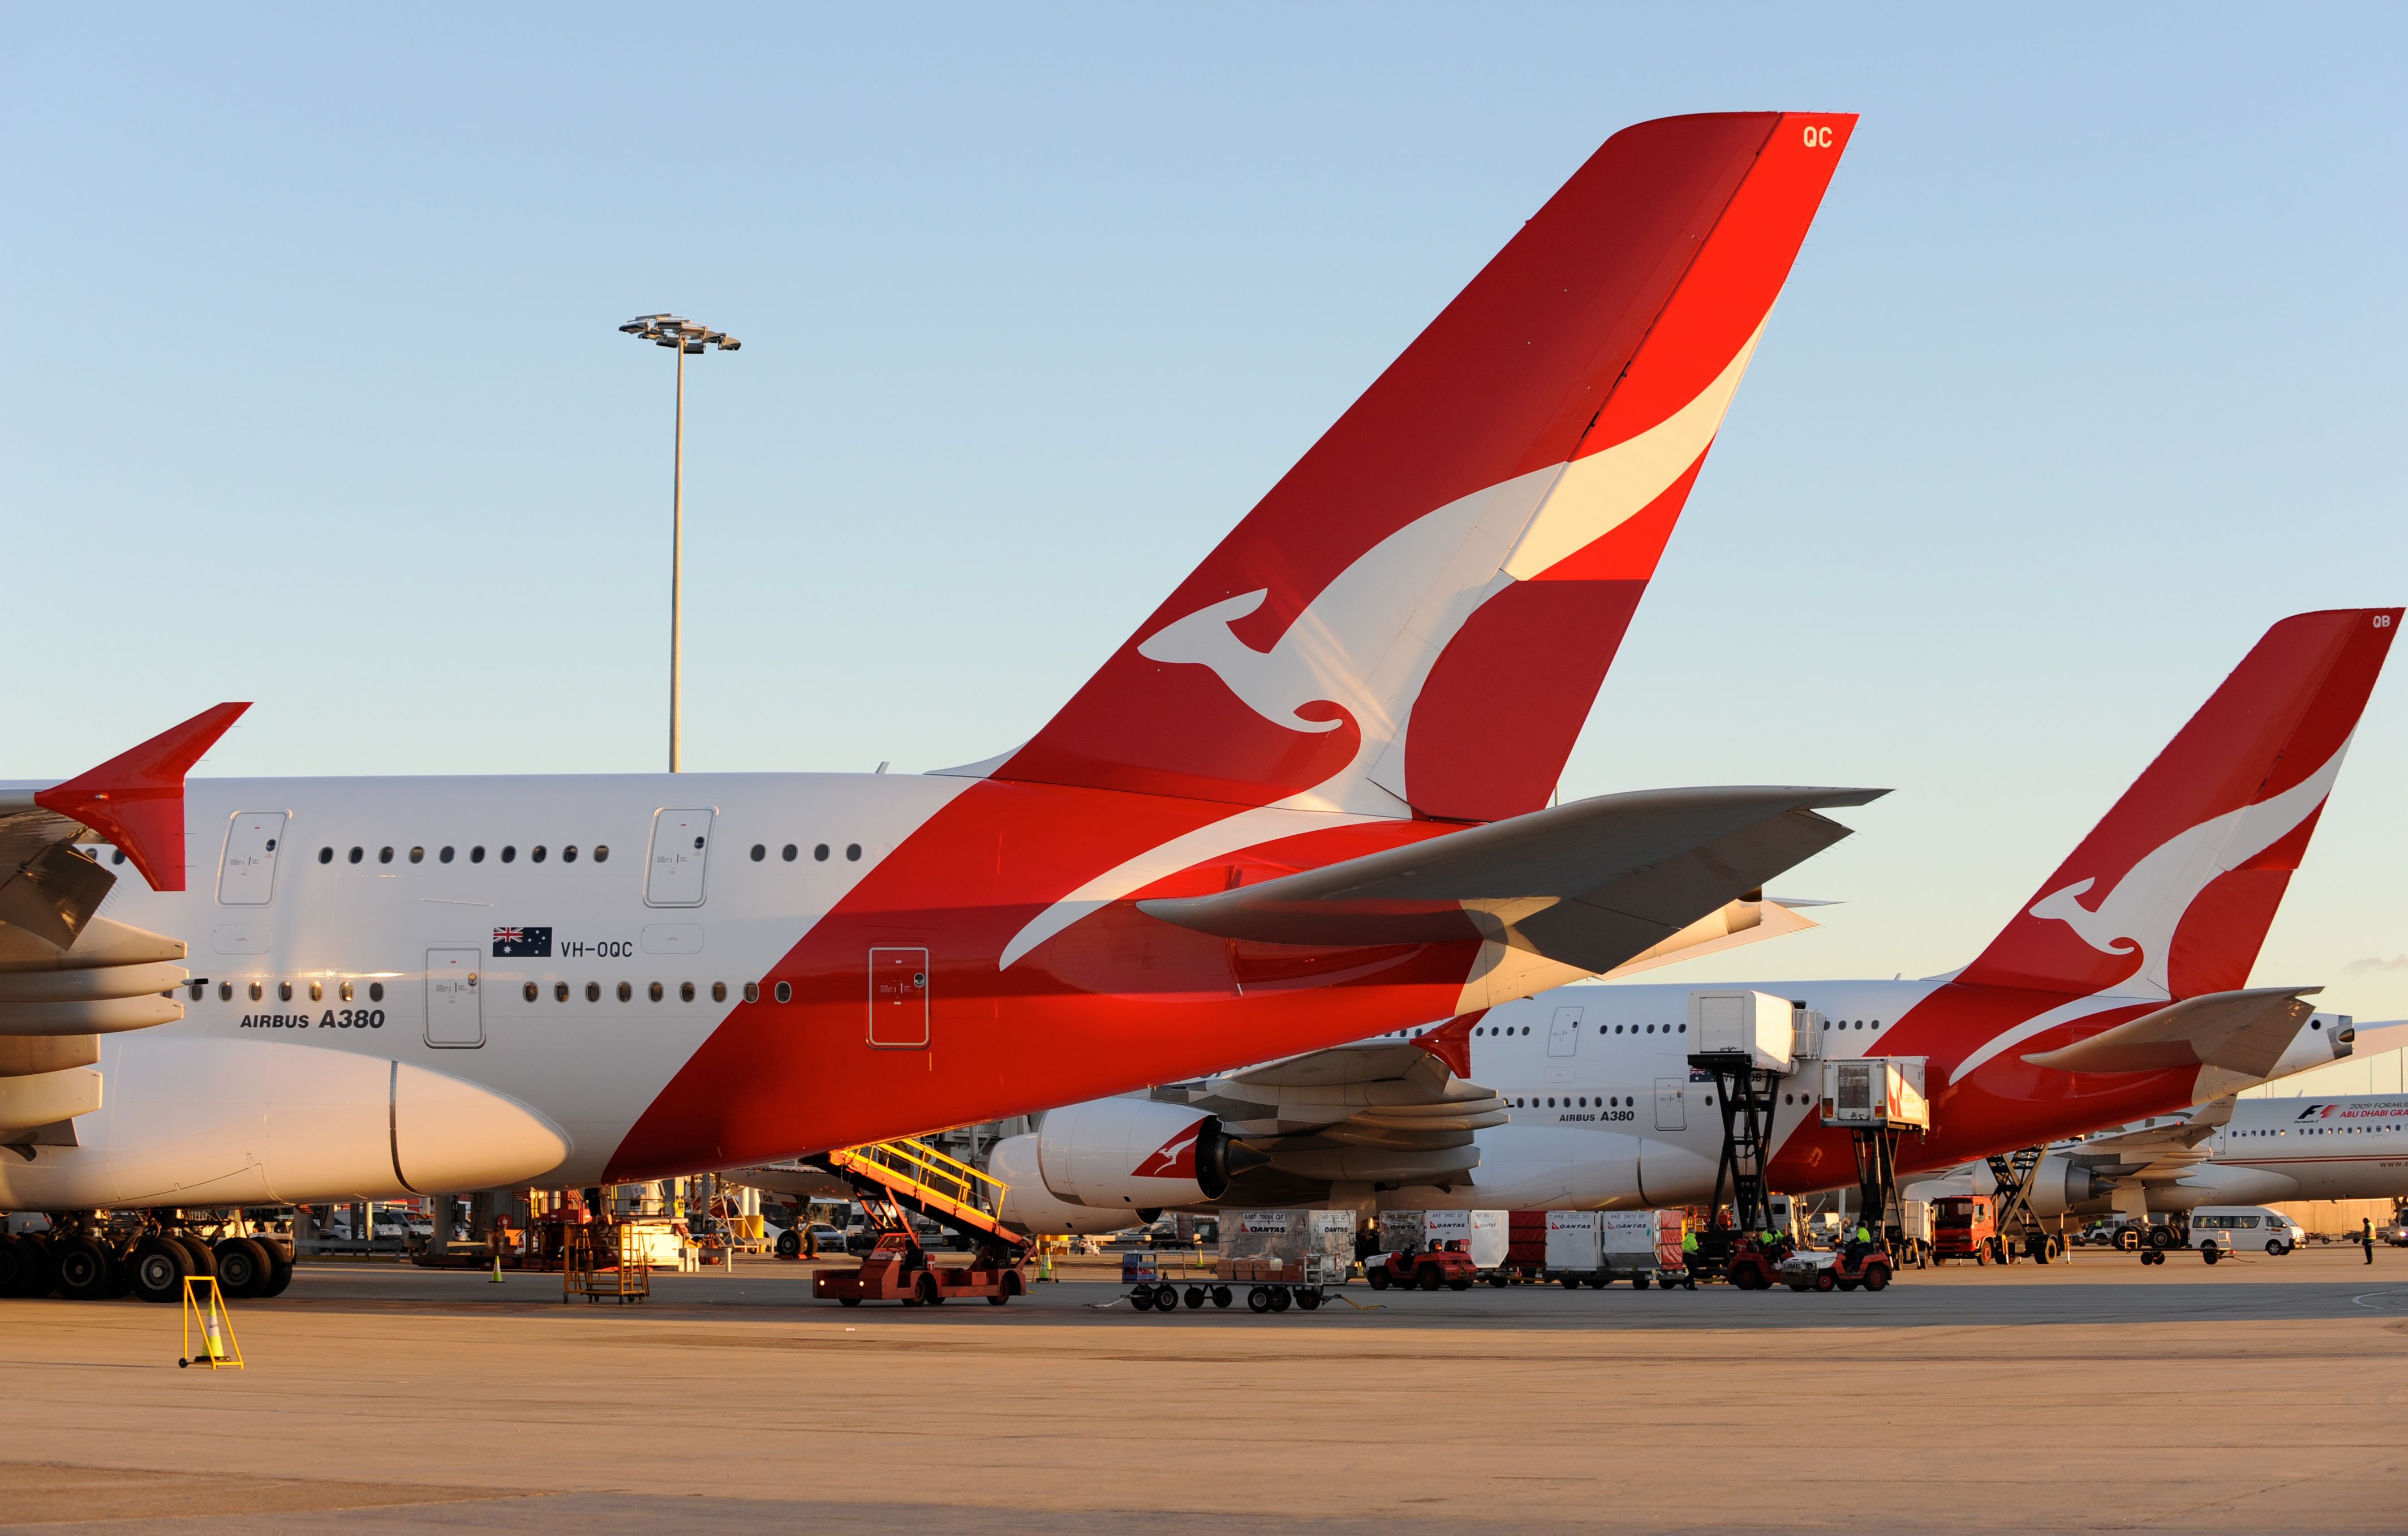 Qantas is once again planning a points plane